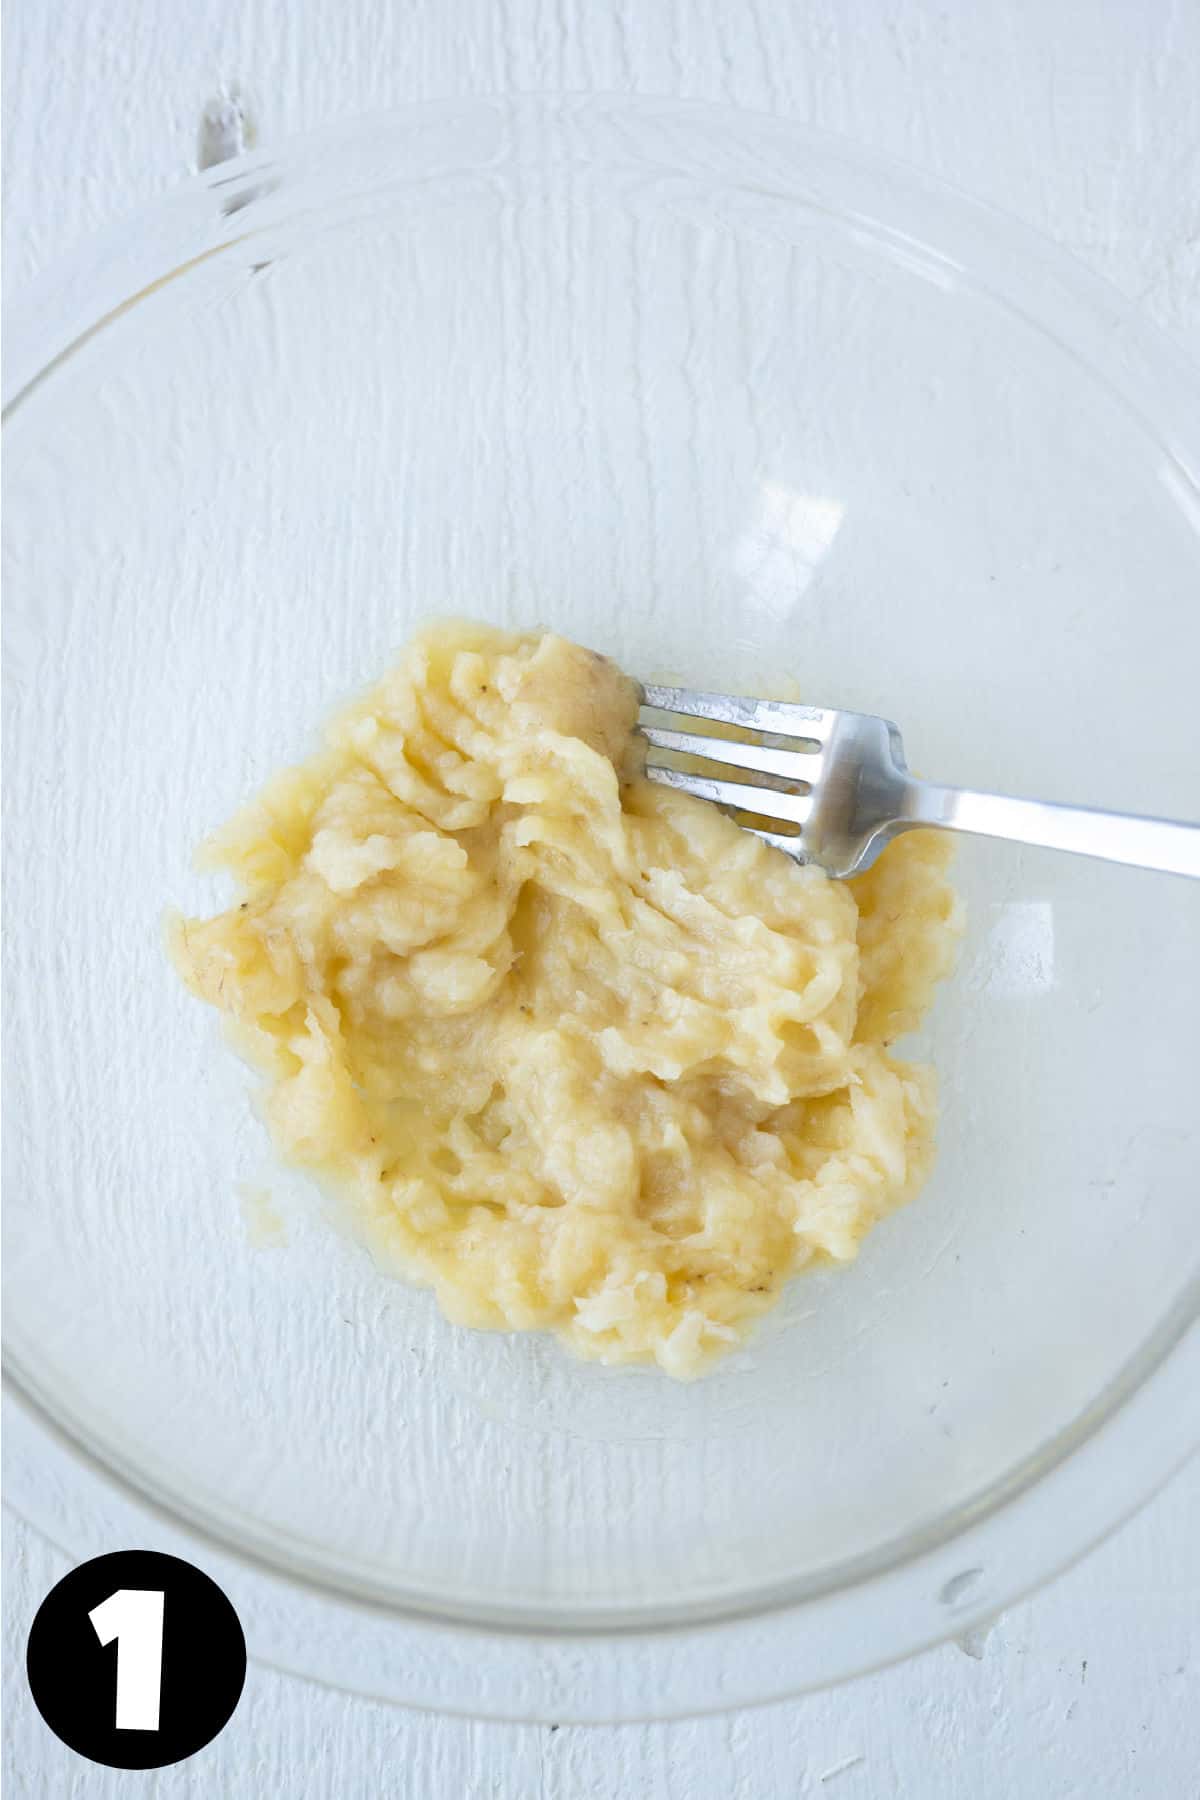 Mashed banana in a glass mixing bowl with a fork.